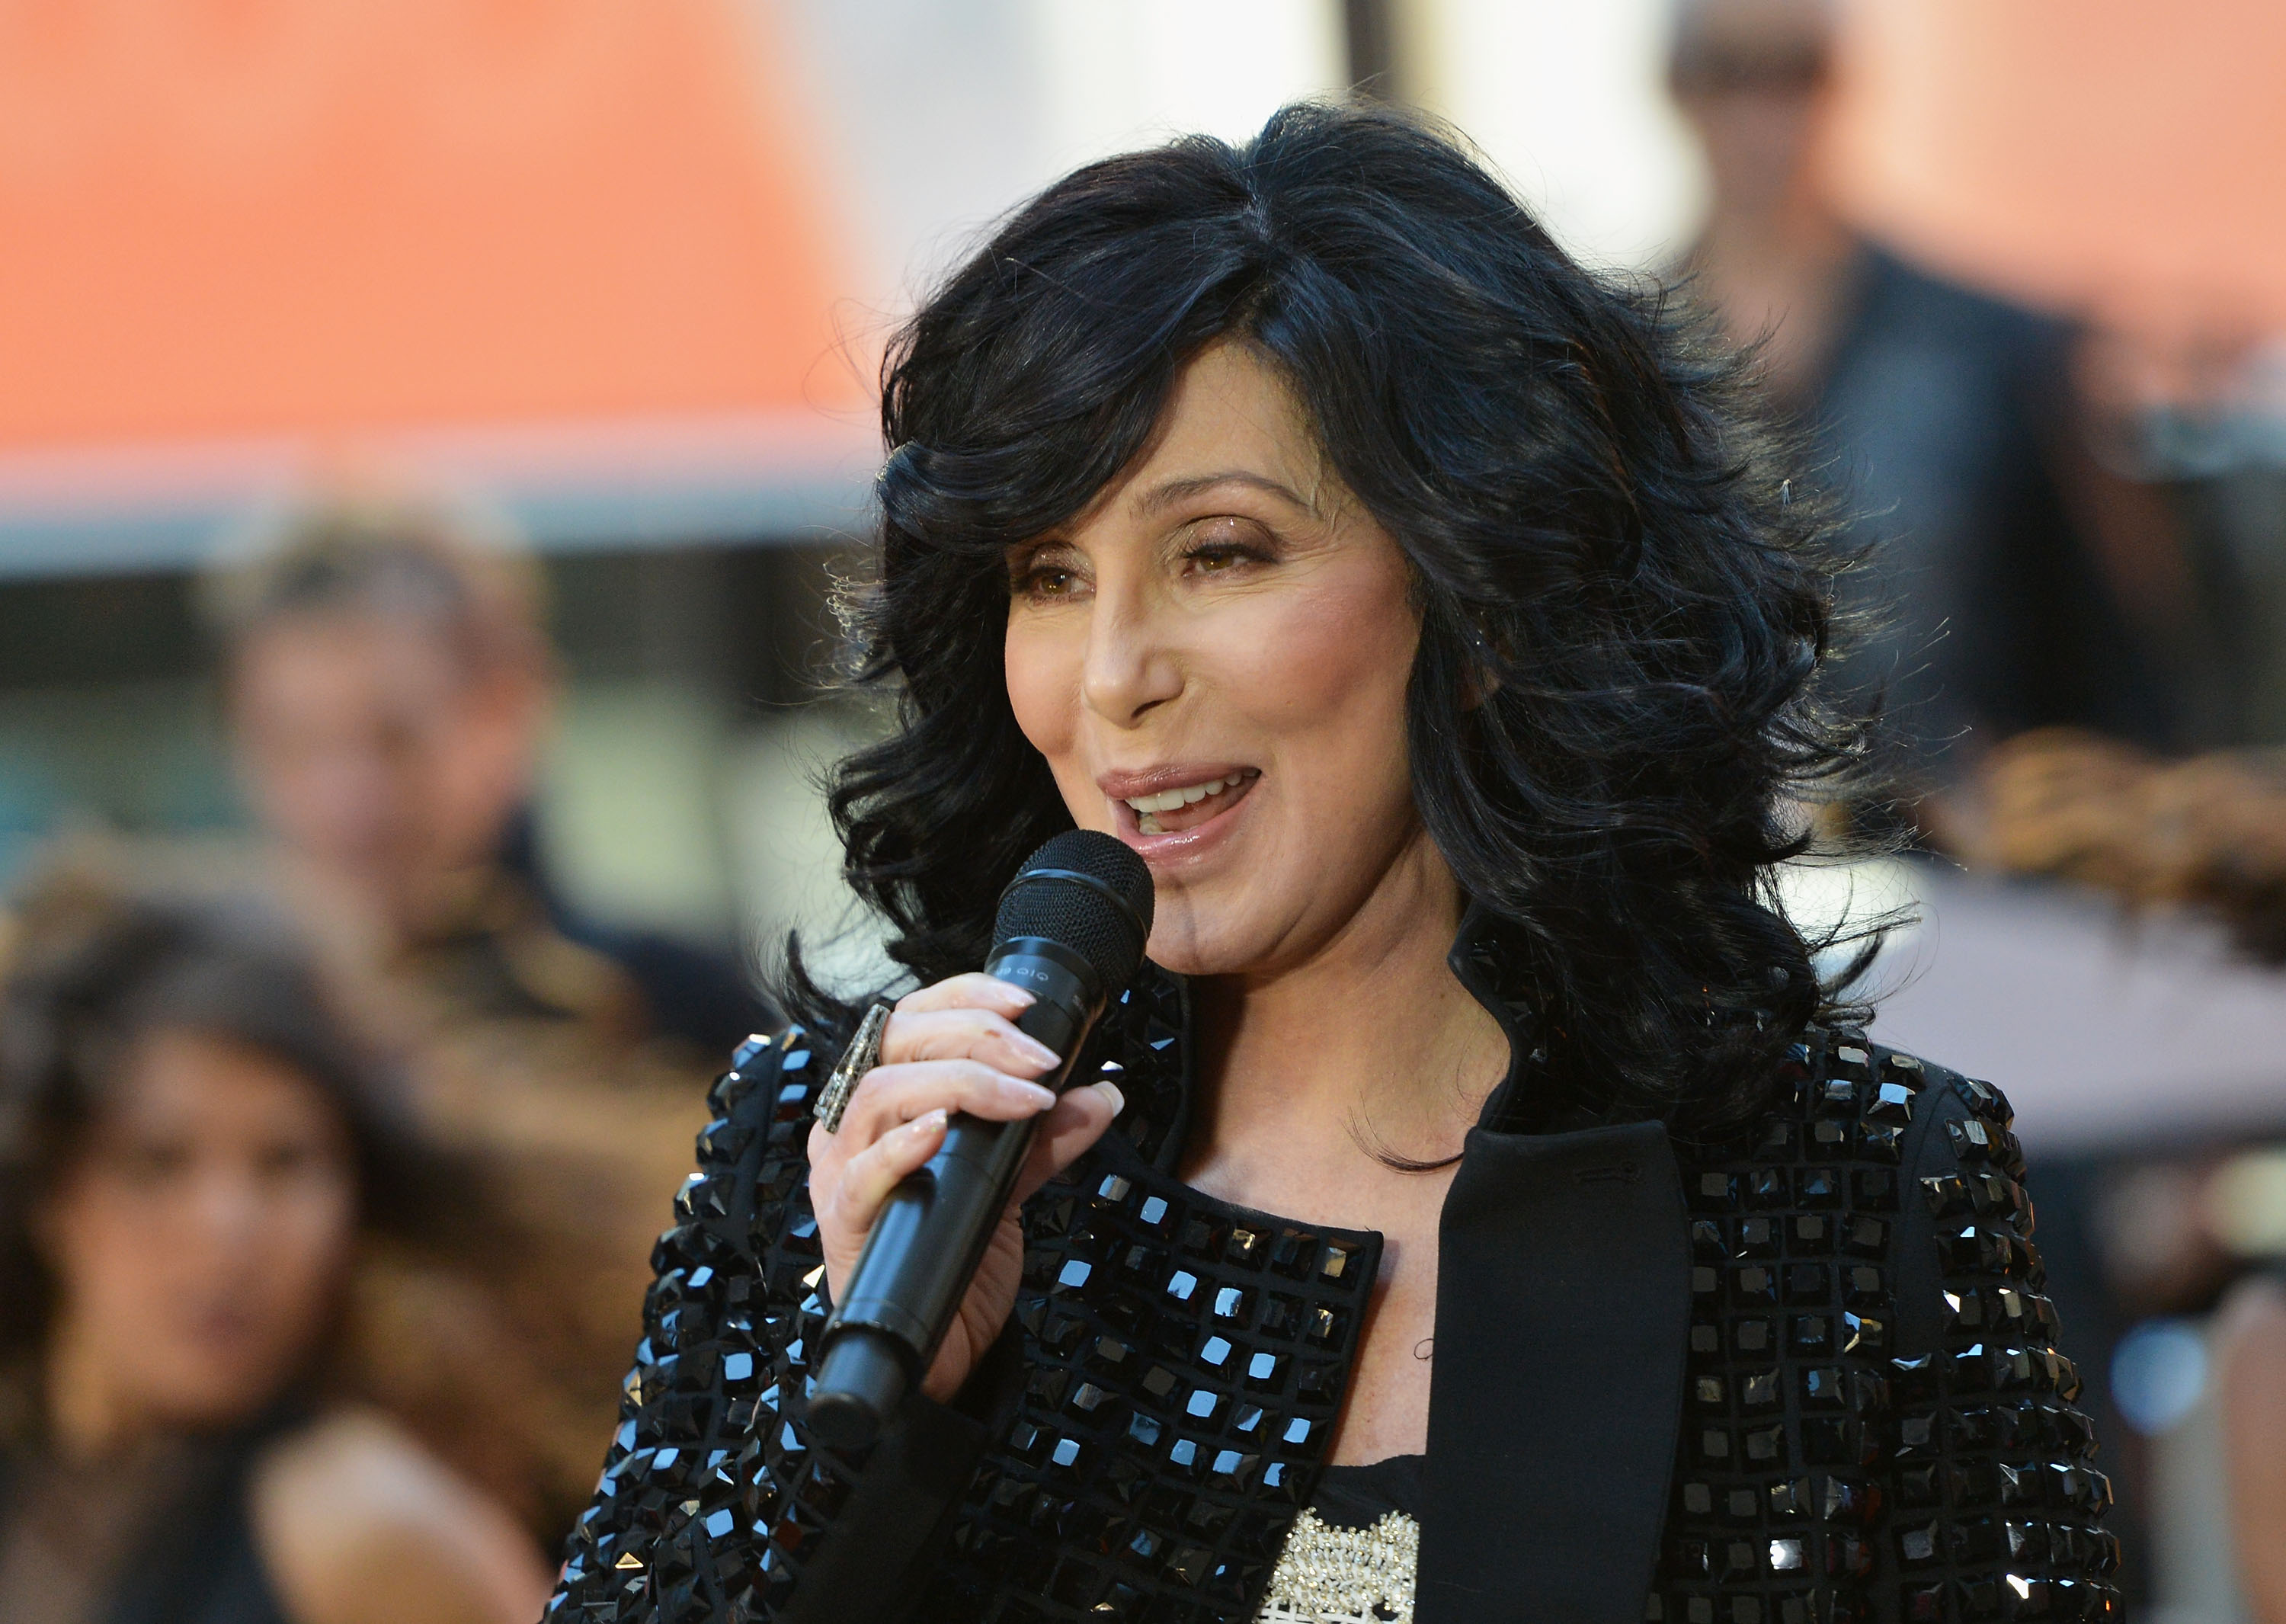 Singer Cher peforms on NBC's "Today" at NBC's TODAY Show in New York City on Sept. 23, 2013. (Slaven Vlasic—Getty Images)